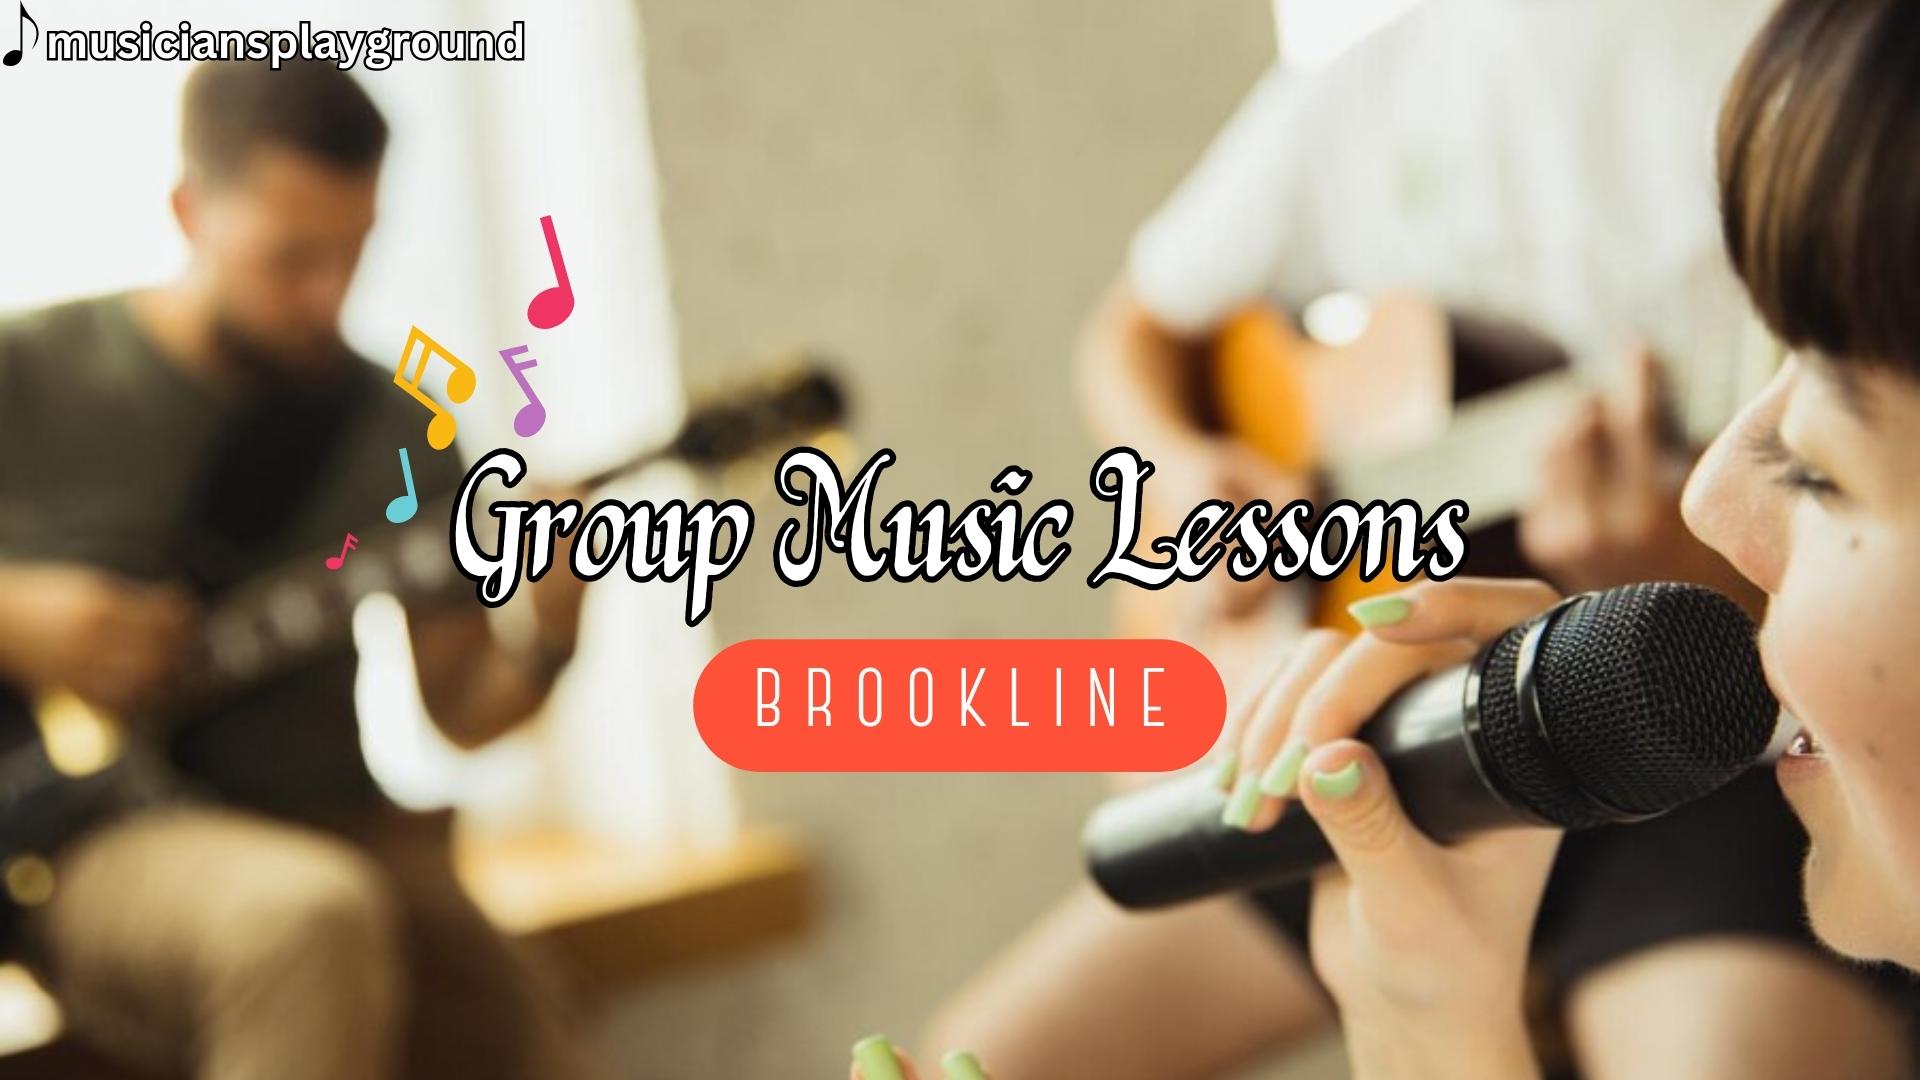 Group Music Lessons in Brookline, Massachusetts: Collaborative Music Learning at Musicians Playground